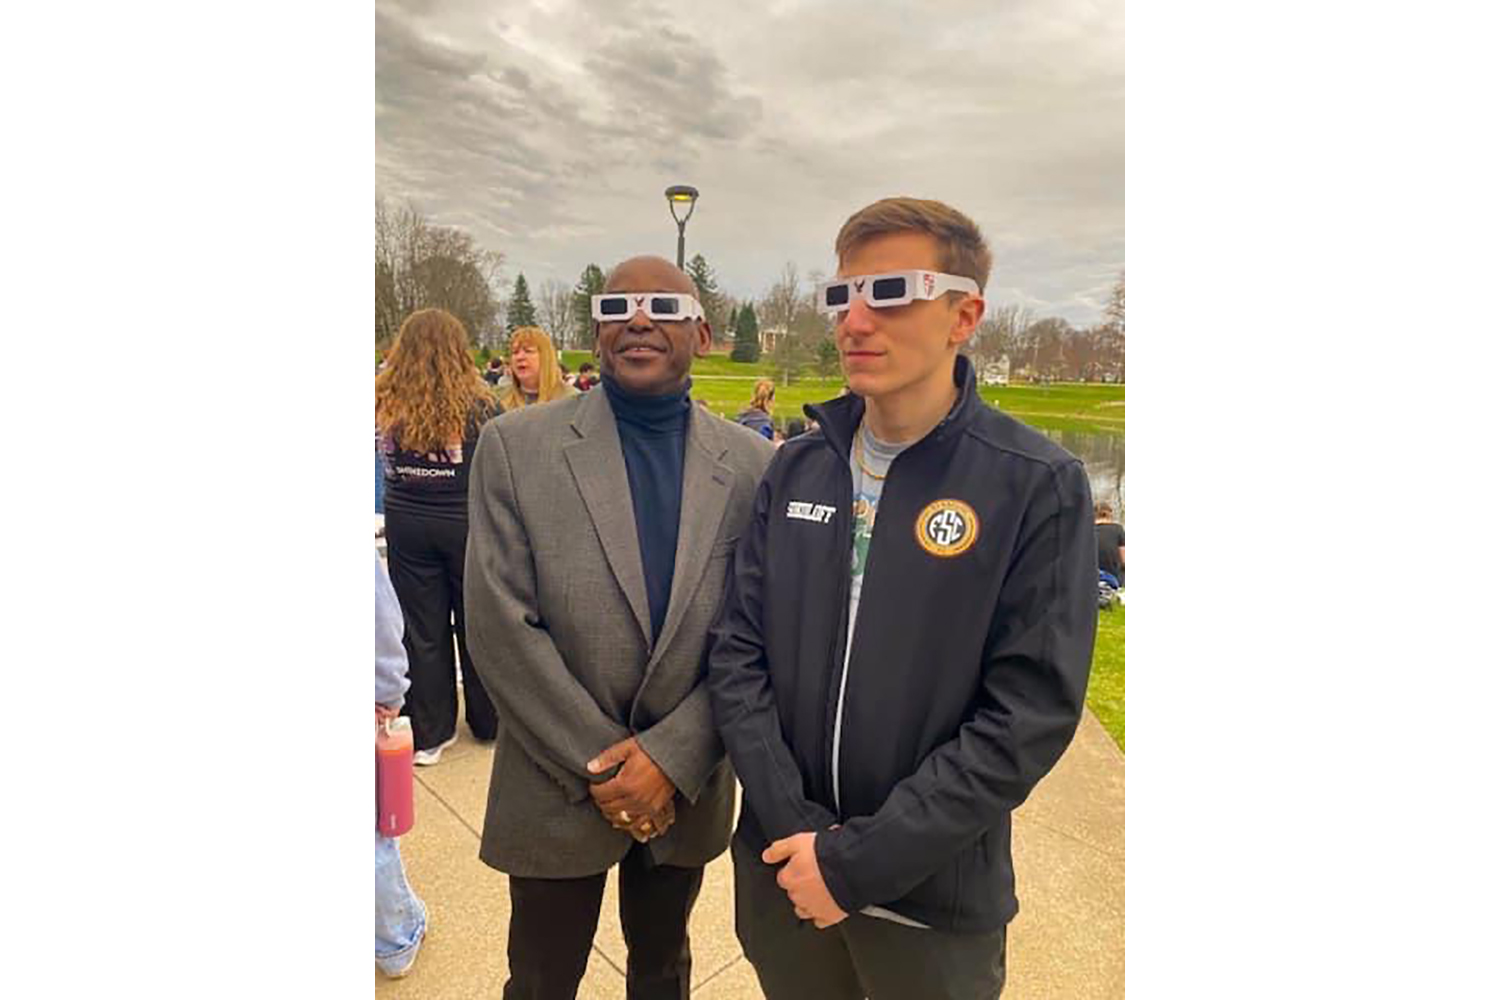 President Hayles and student Mikhail Sokoloff in eclipse glassess